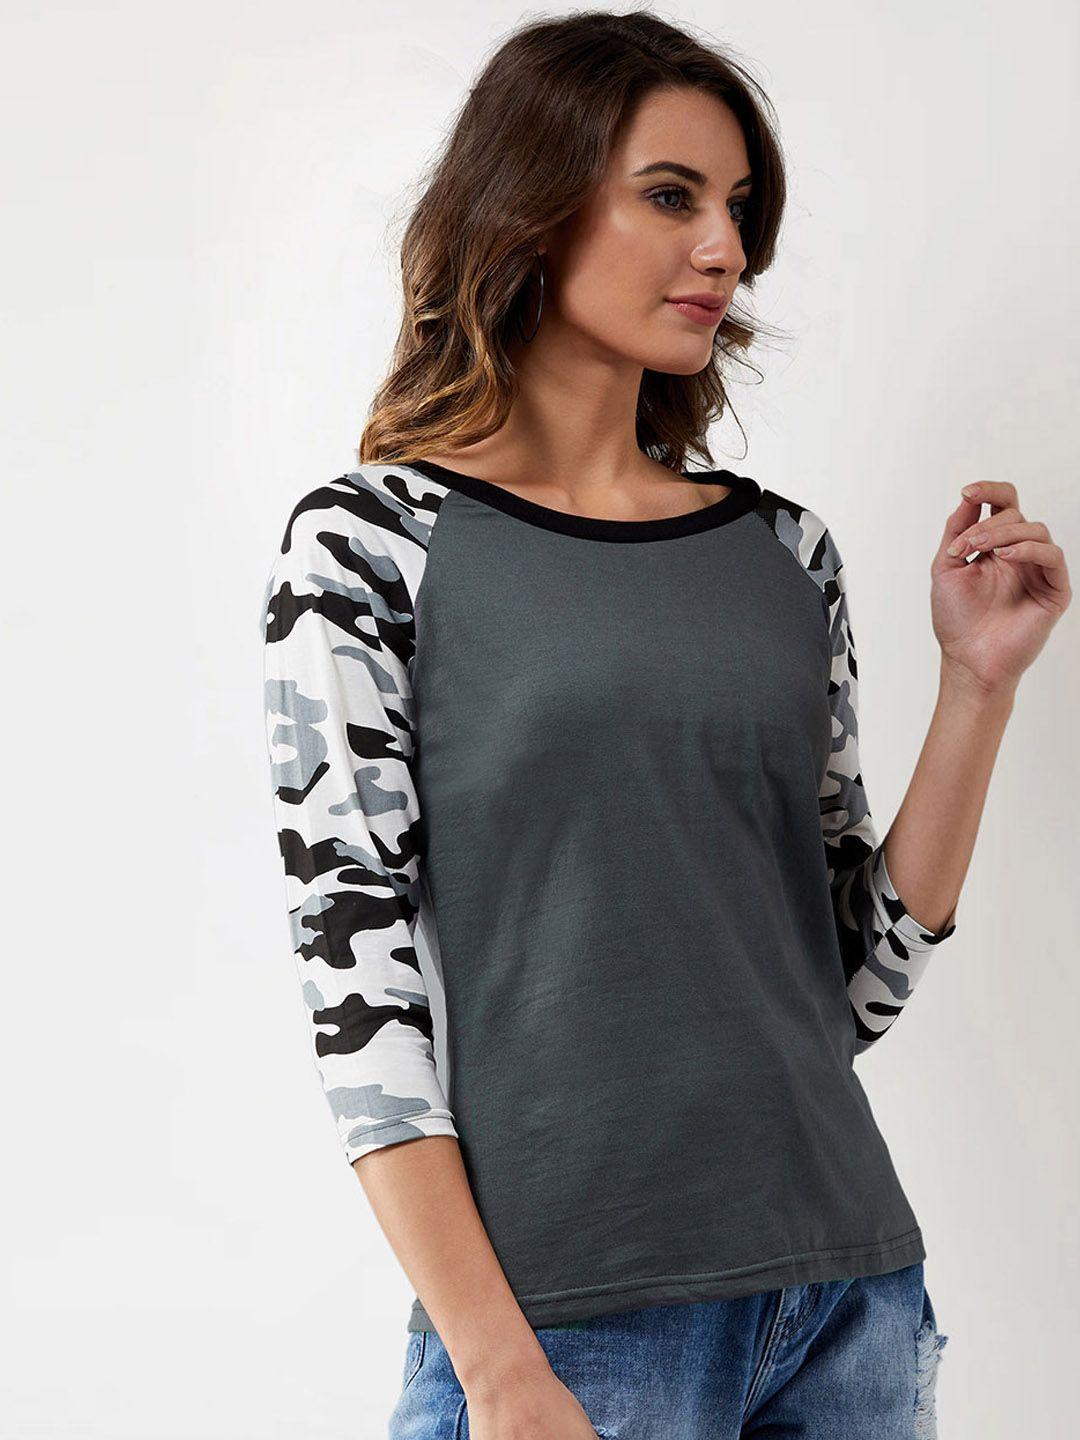 miss-chase-women-grey-&-white-camouflage-printed-round-neck-t-shirt